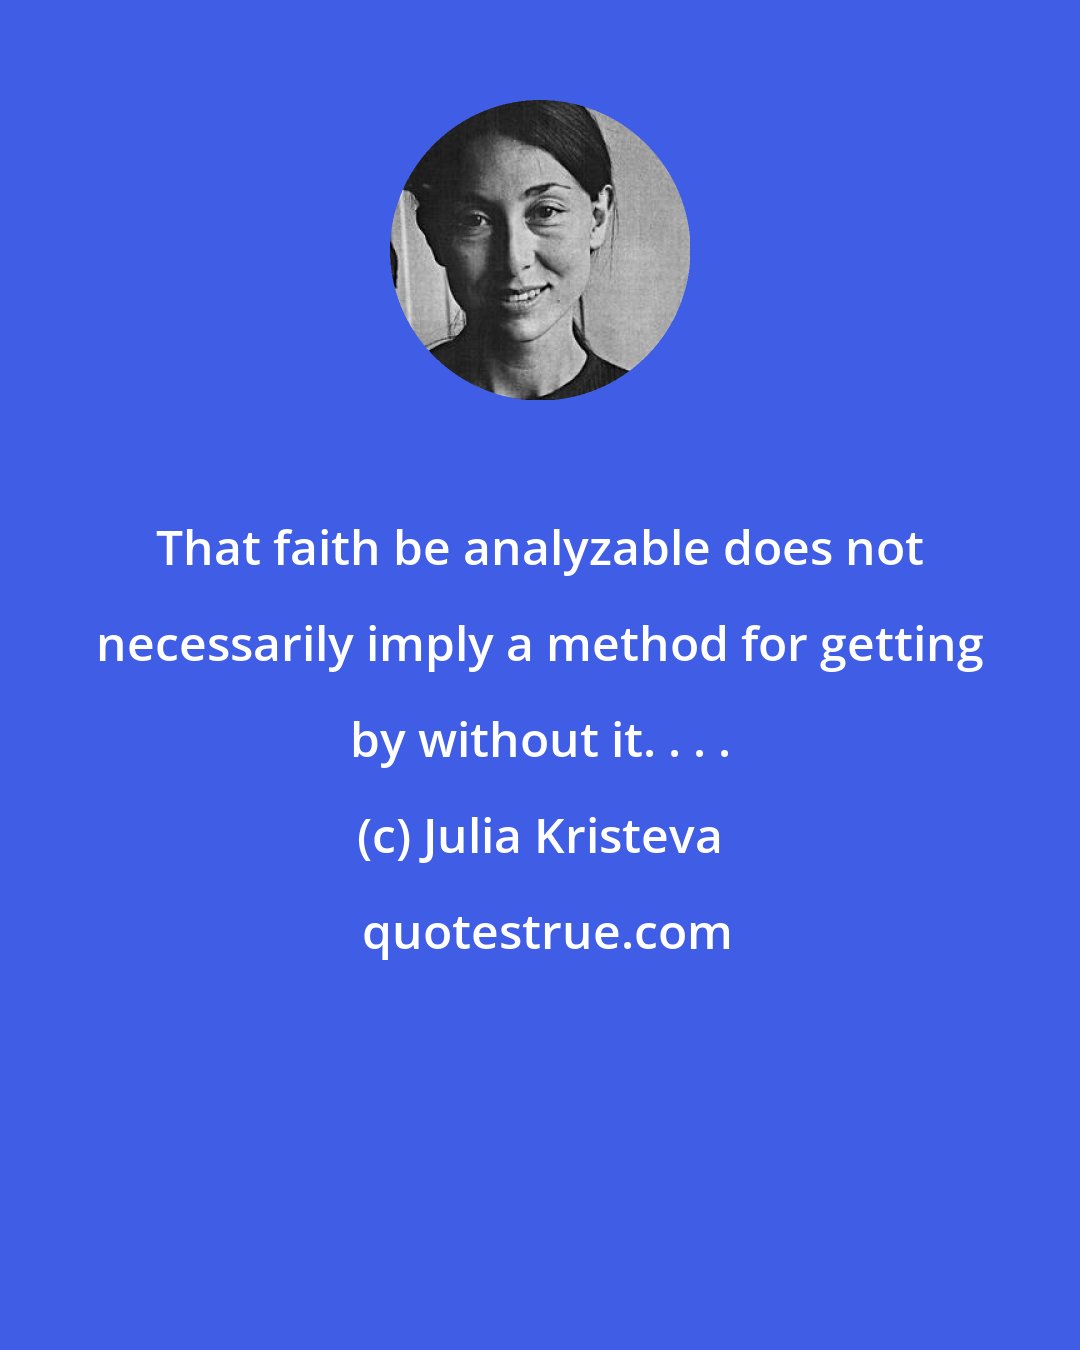 Julia Kristeva: That faith be analyzable does not necessarily imply a method for getting by without it. . . .